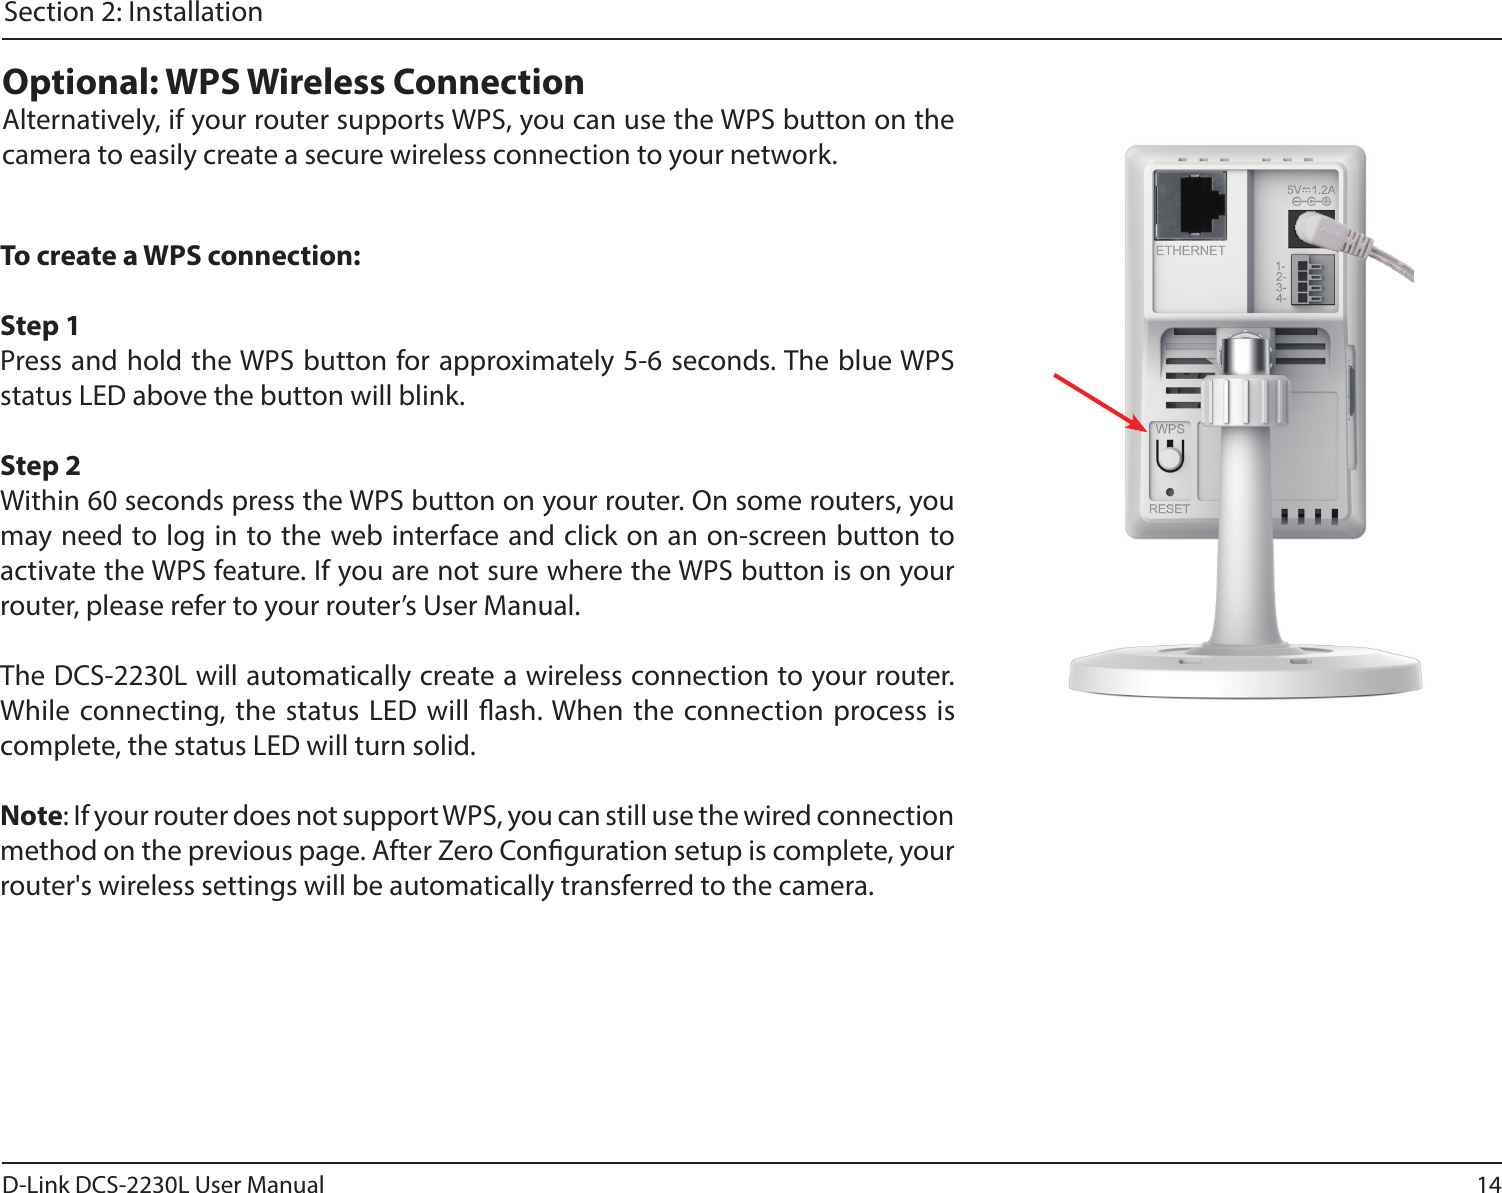 14D-Link DCS-2230L User ManualSection 2: InstallationTo create a WPS connection:Step 1Press and hold the WPS button for approximately 5-6 seconds. The blue WPS status LED above the button will blink.Step 2Within 60 seconds press the WPS button on your router. On some routers, you may need to log in to the web interface and click on an on-screen button to activate the WPS feature. If you are not sure where the WPS button is on your router, please refer to your router’s User Manual.The DCS-2230L will automatically create a wireless connection to your router. While connecting, the status LED will ash. When the connection process is complete, the status LED will turn solid.Note: If your router does not support WPS, you can still use the wired connection method on the previous page. After Zero Conguration setup is complete, your router&apos;s wireless settings will be automatically transferred to the camera.Optional: WPS Wireless ConnectionAlternatively, if your router supports WPS, you can use the WPS button on the camera to easily create a secure wireless connection to your network.